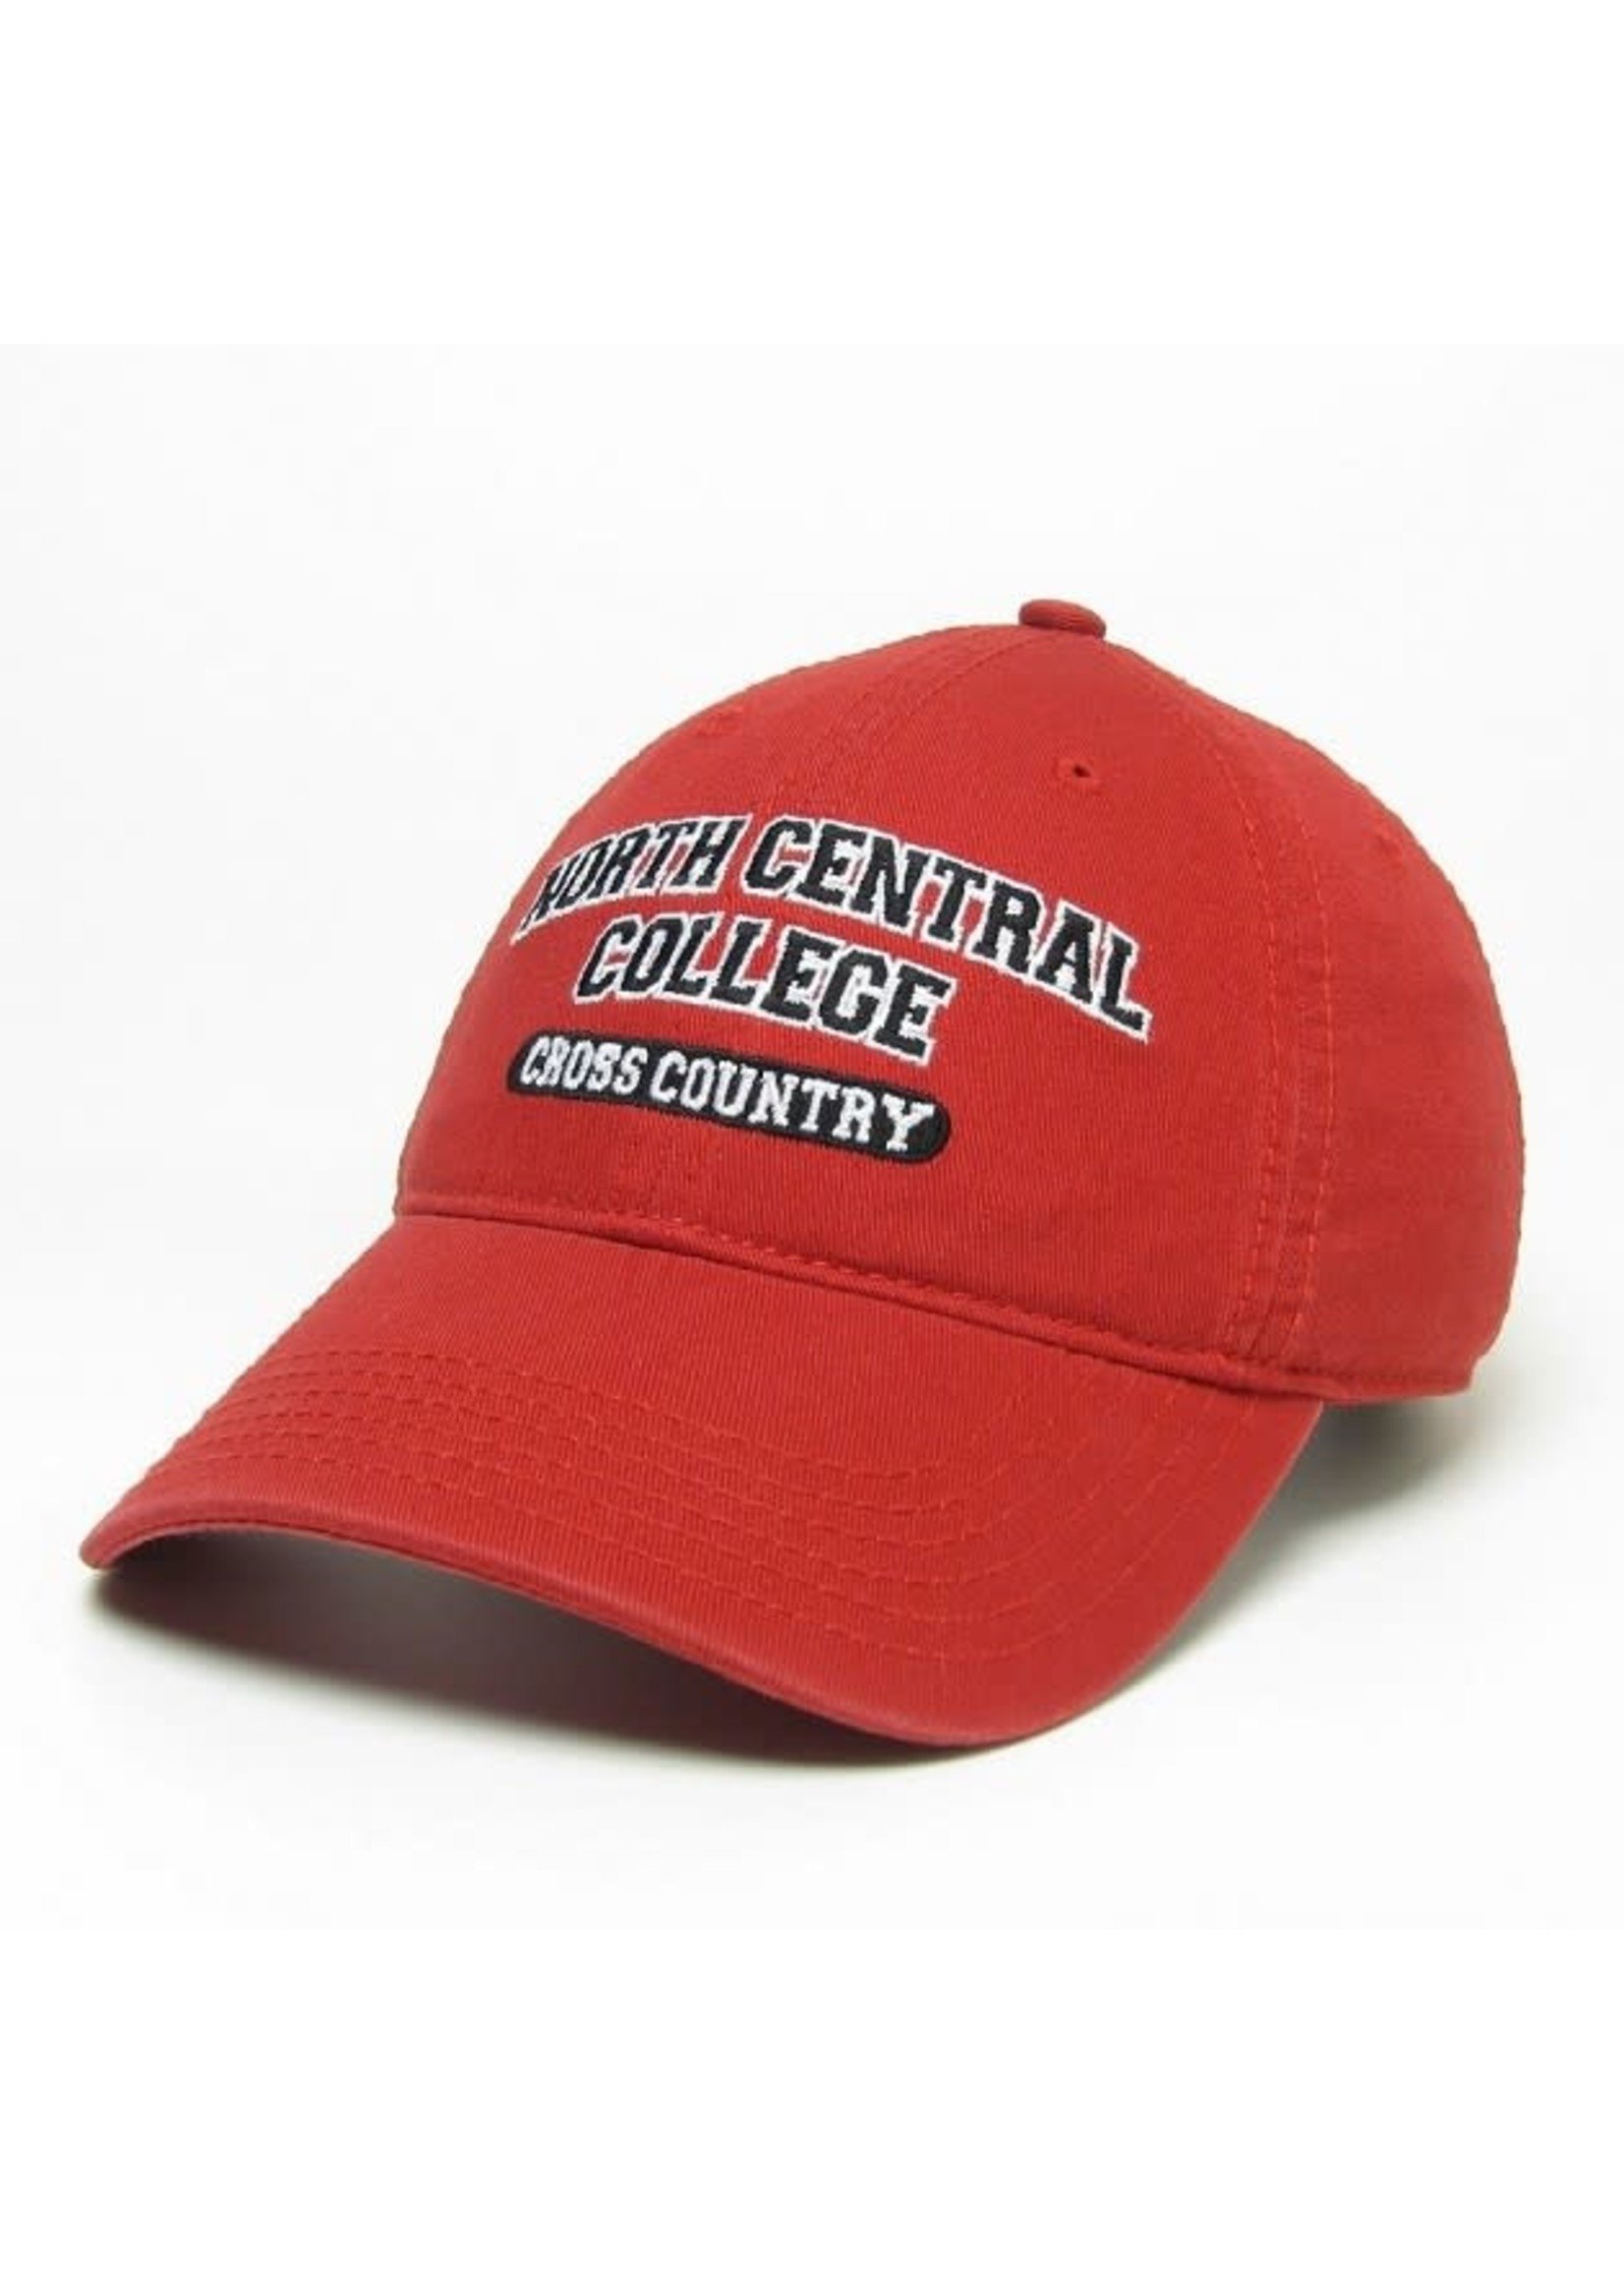 North Central College Name Drop Hats - North Central College Campus Store